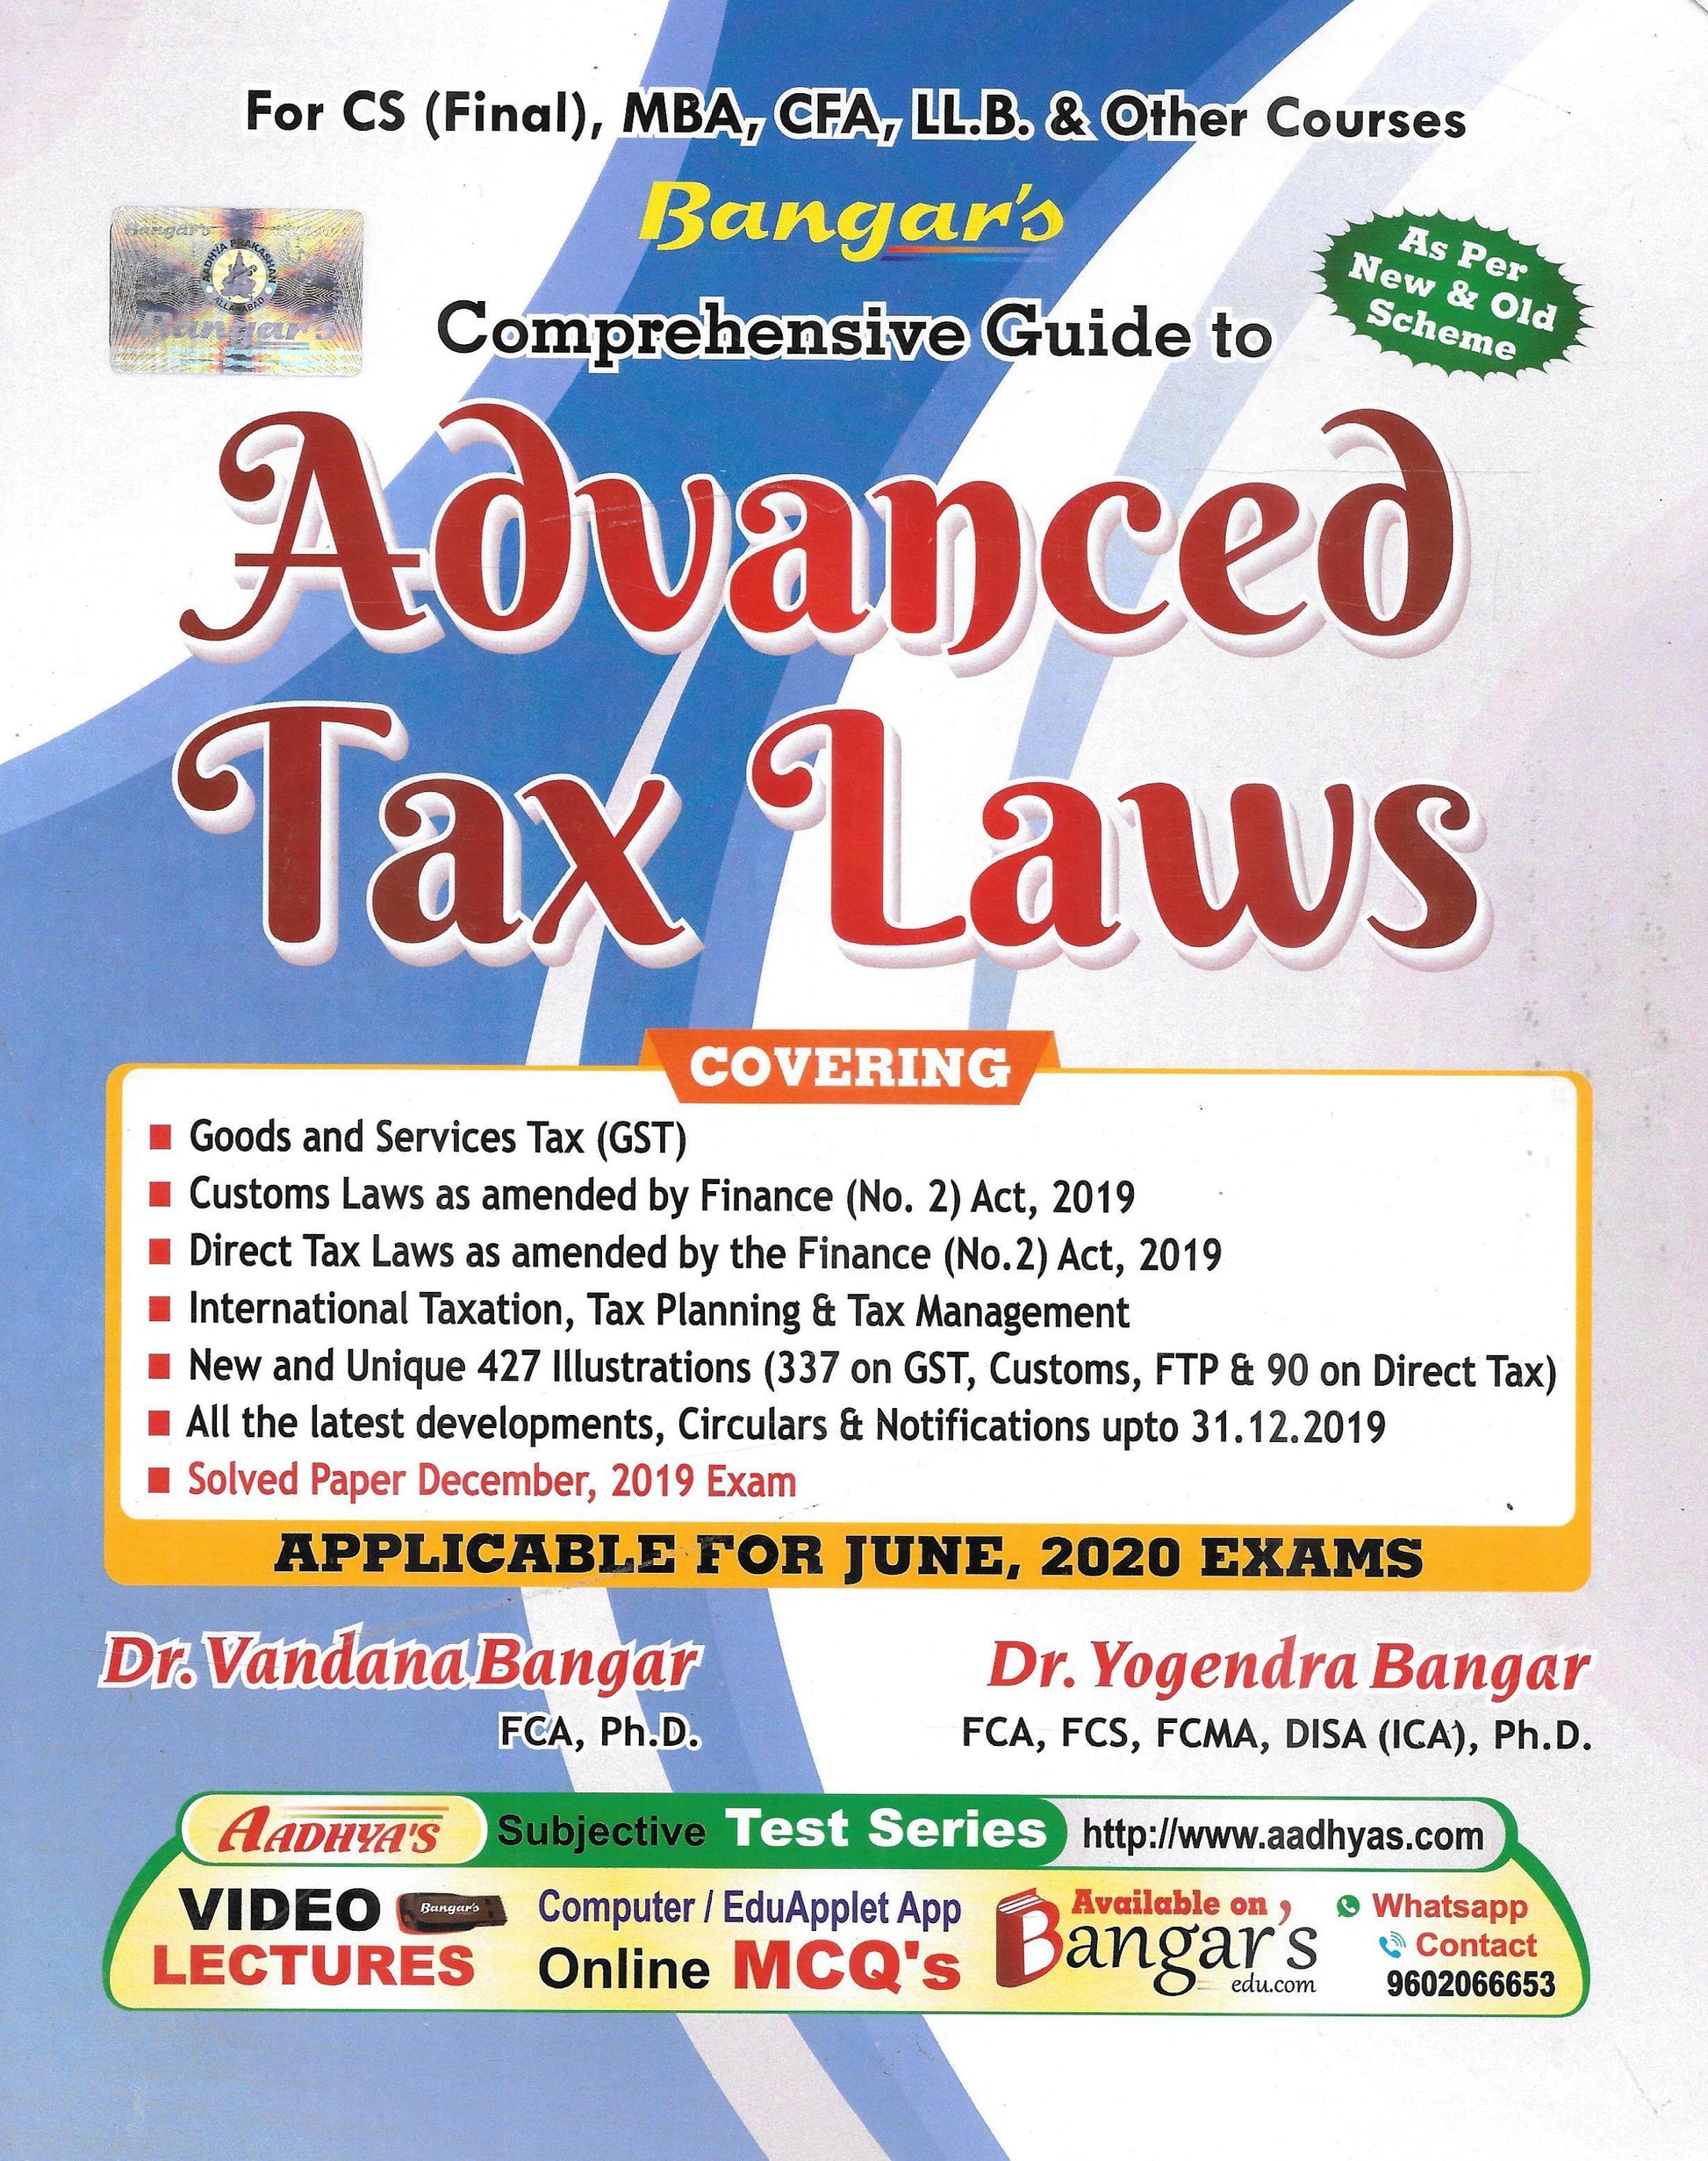 Comprehensive Guide to Advanced Tax Laws - CS Final - M&J Services